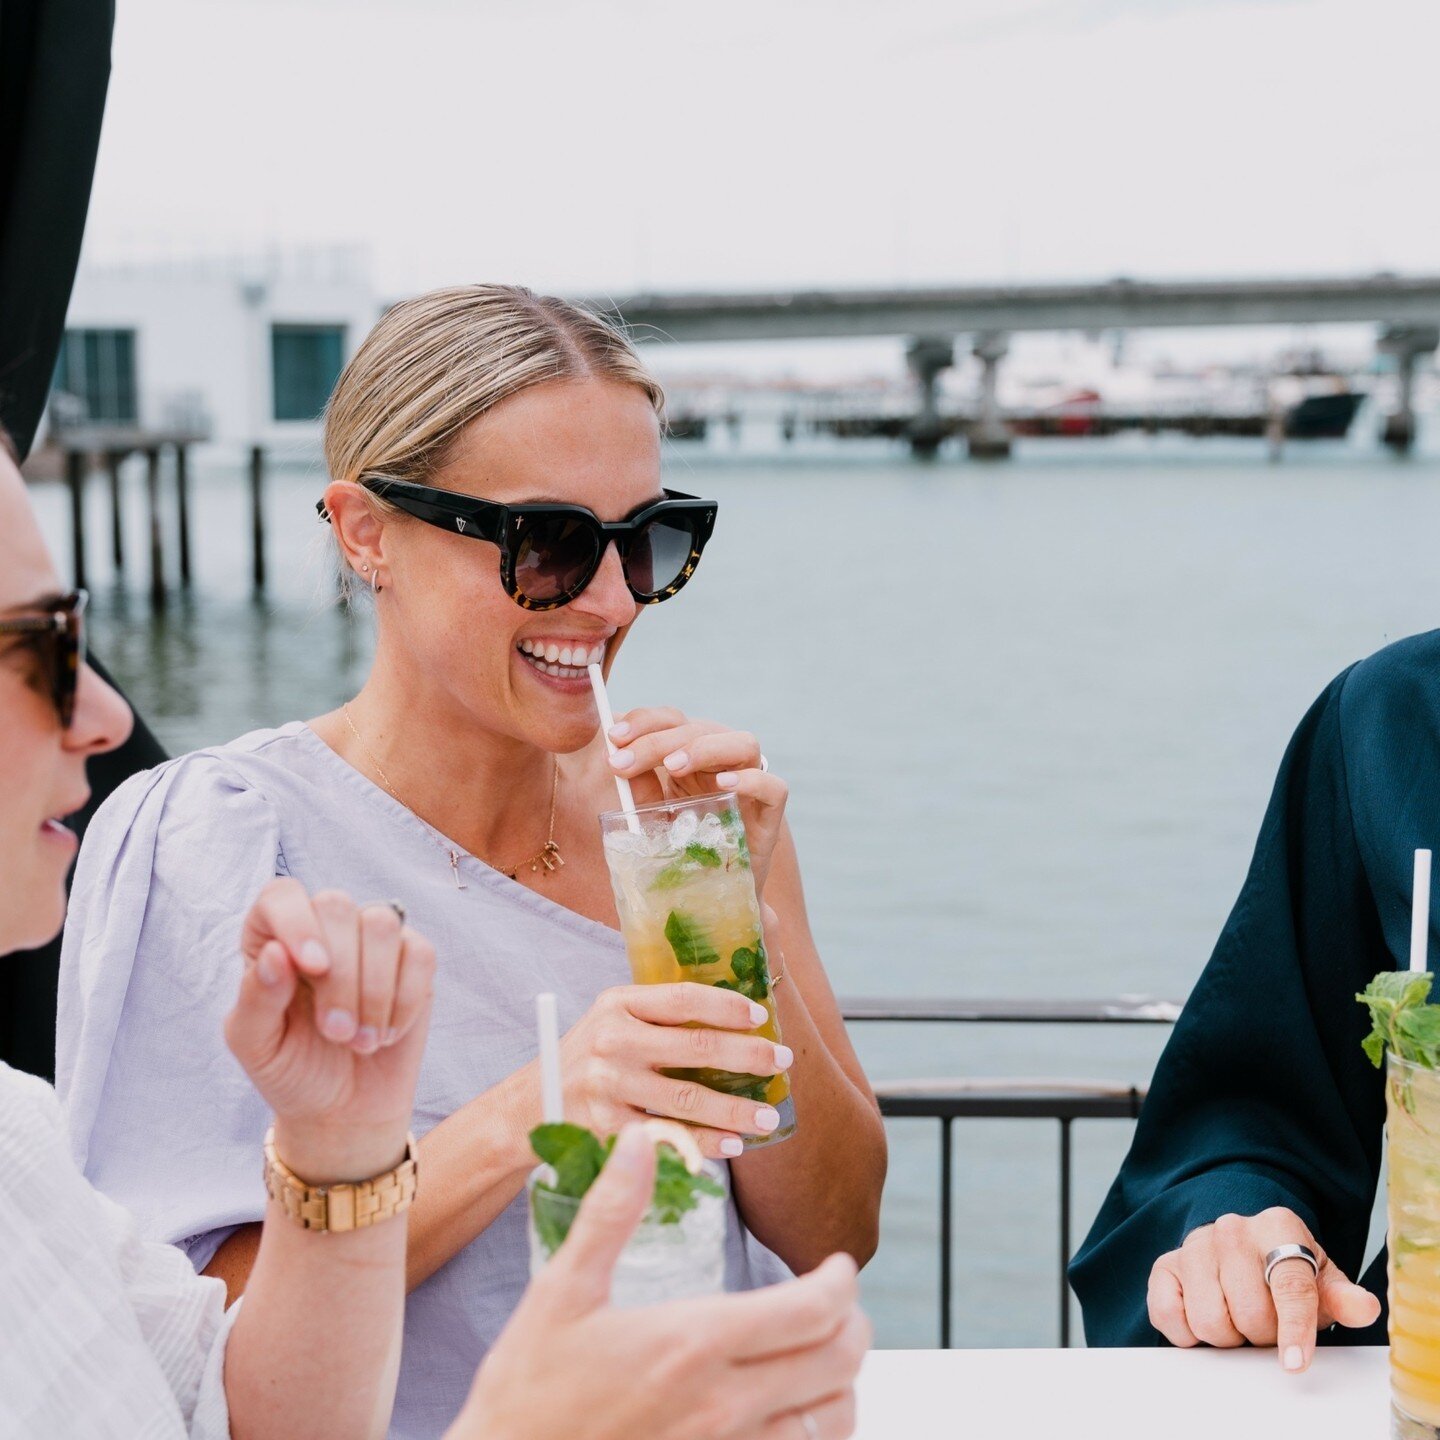 Last call for daylight saving sunshine! 🌞 Make every moment count and bask in the post-work glow on our sunny deck this week. 
.
.
.
#waterfrontbar #tauranga #cocktails #workdrinks